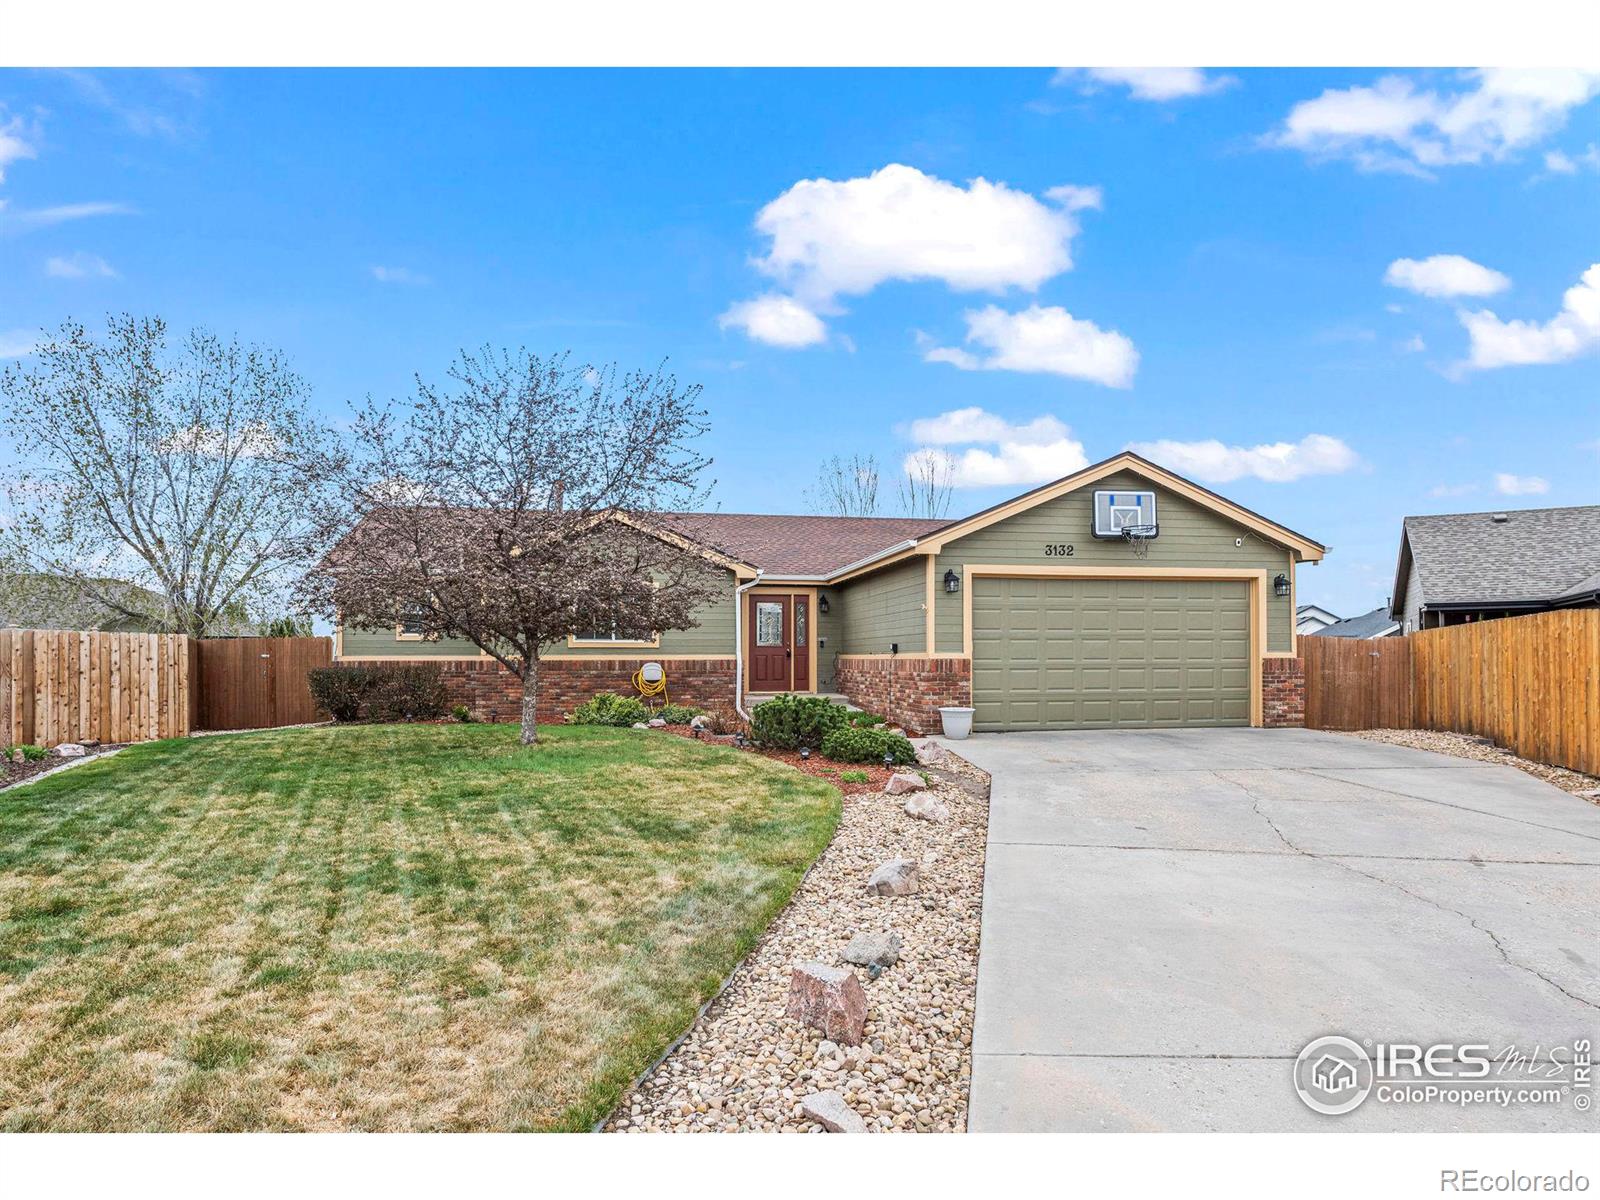 3132  52nd Avenue, greeley MLS: 4567891007406 Beds: 5 Baths: 3 Price: $505,000